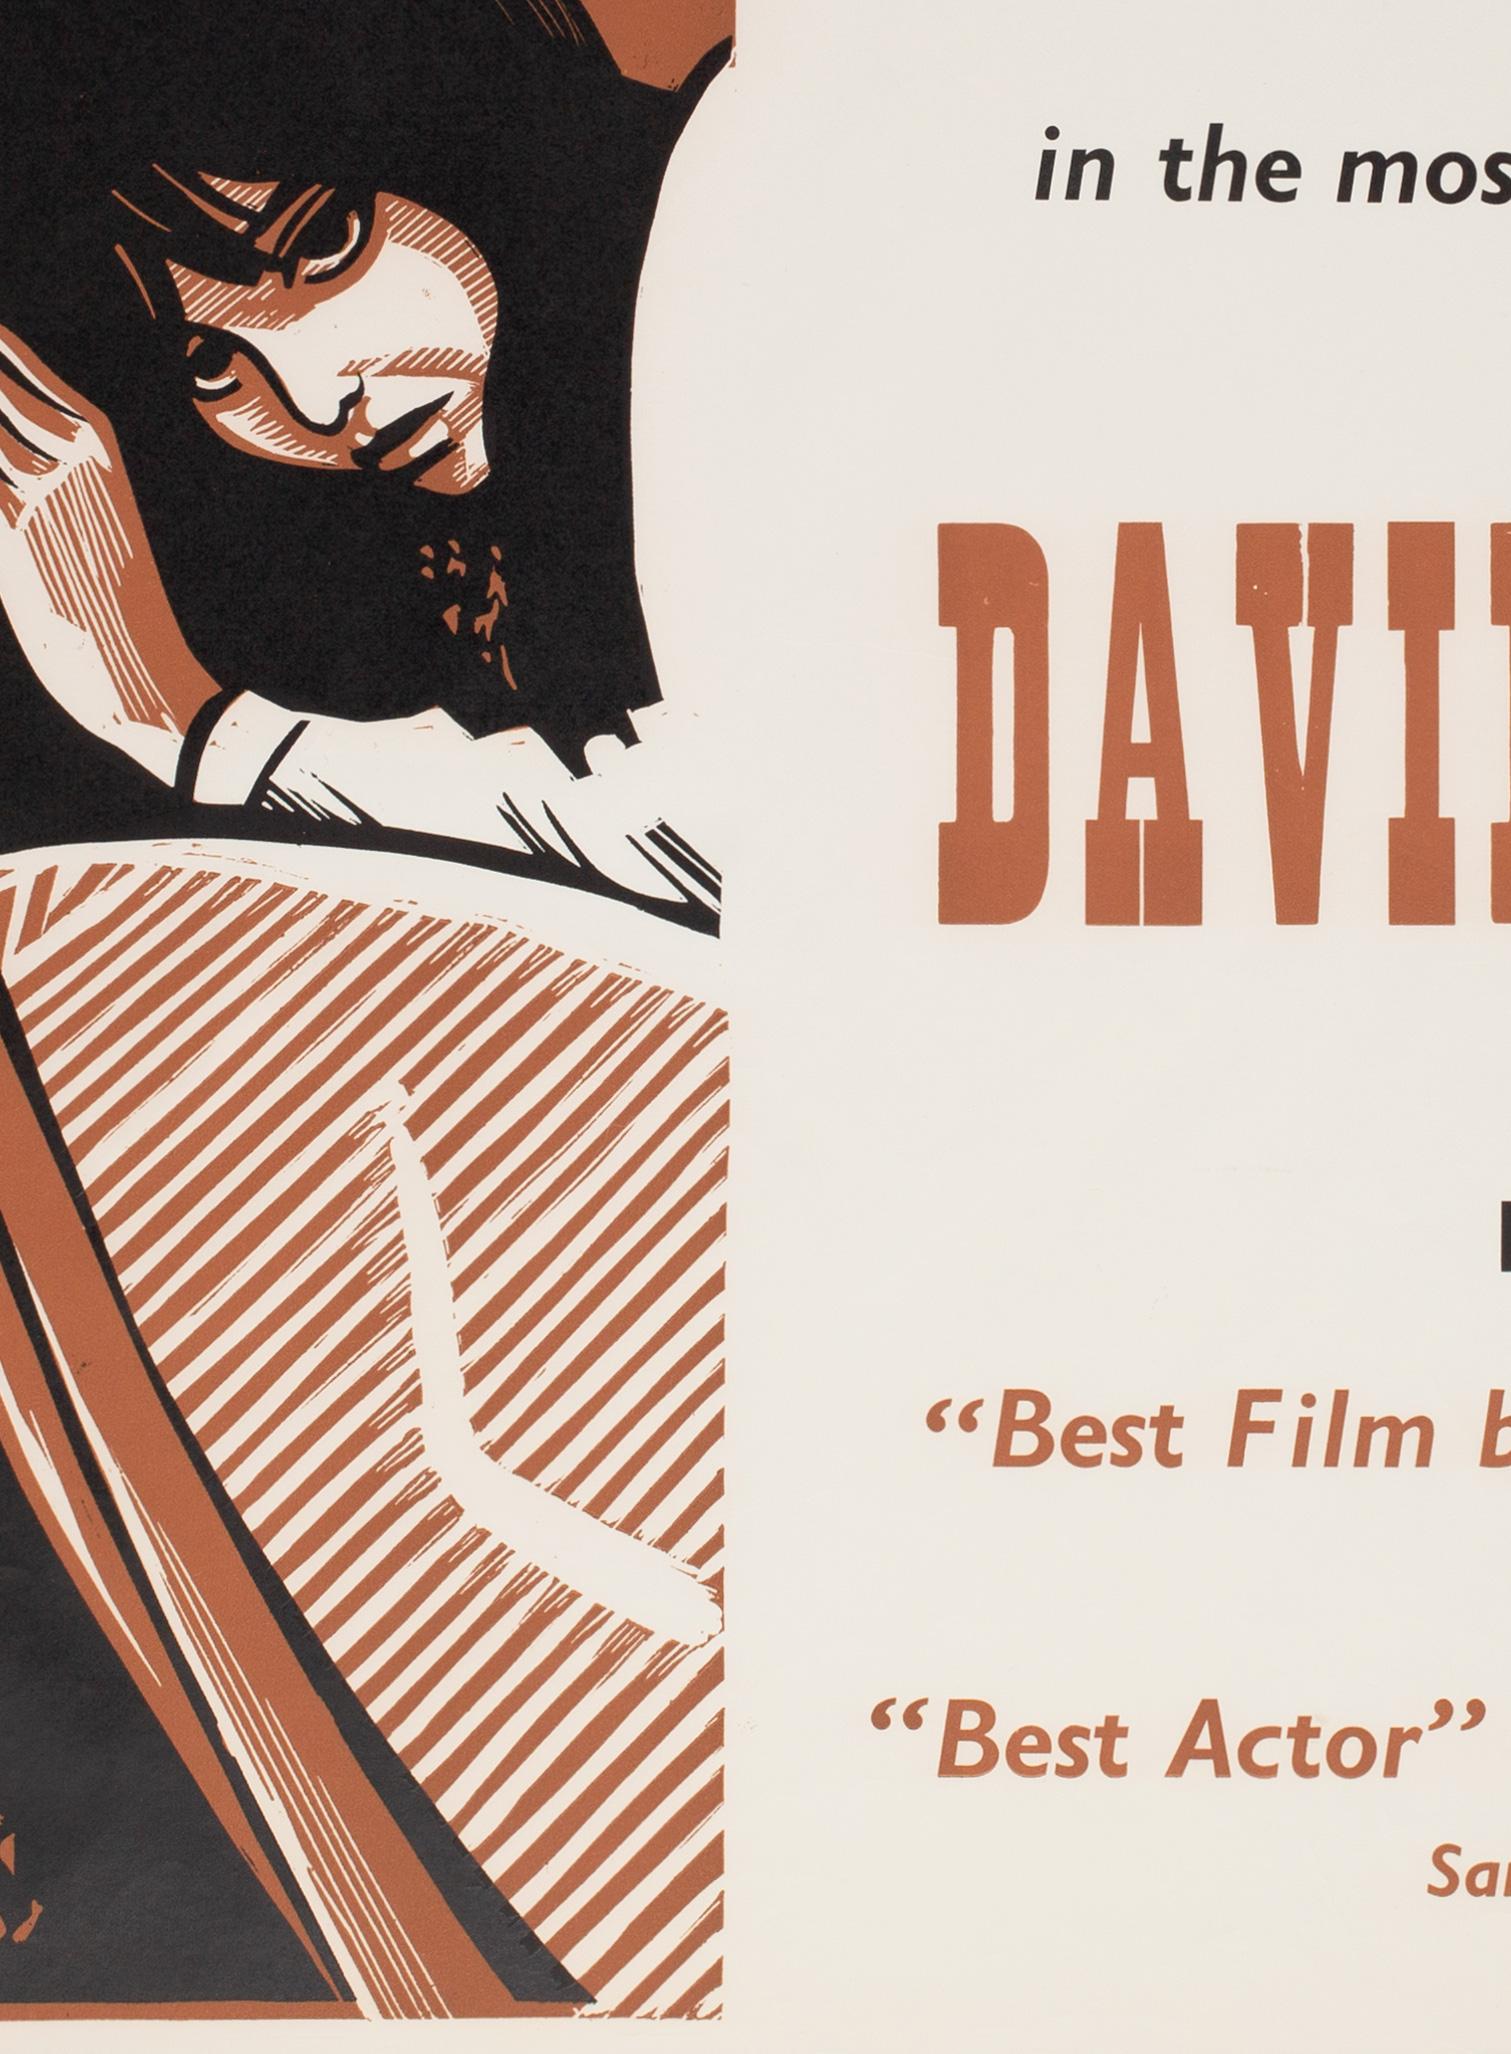 David and Lisa 1963 Academy Cinema UK Quad Film Poster, Strausfeld In Good Condition For Sale In Bath, Somerset